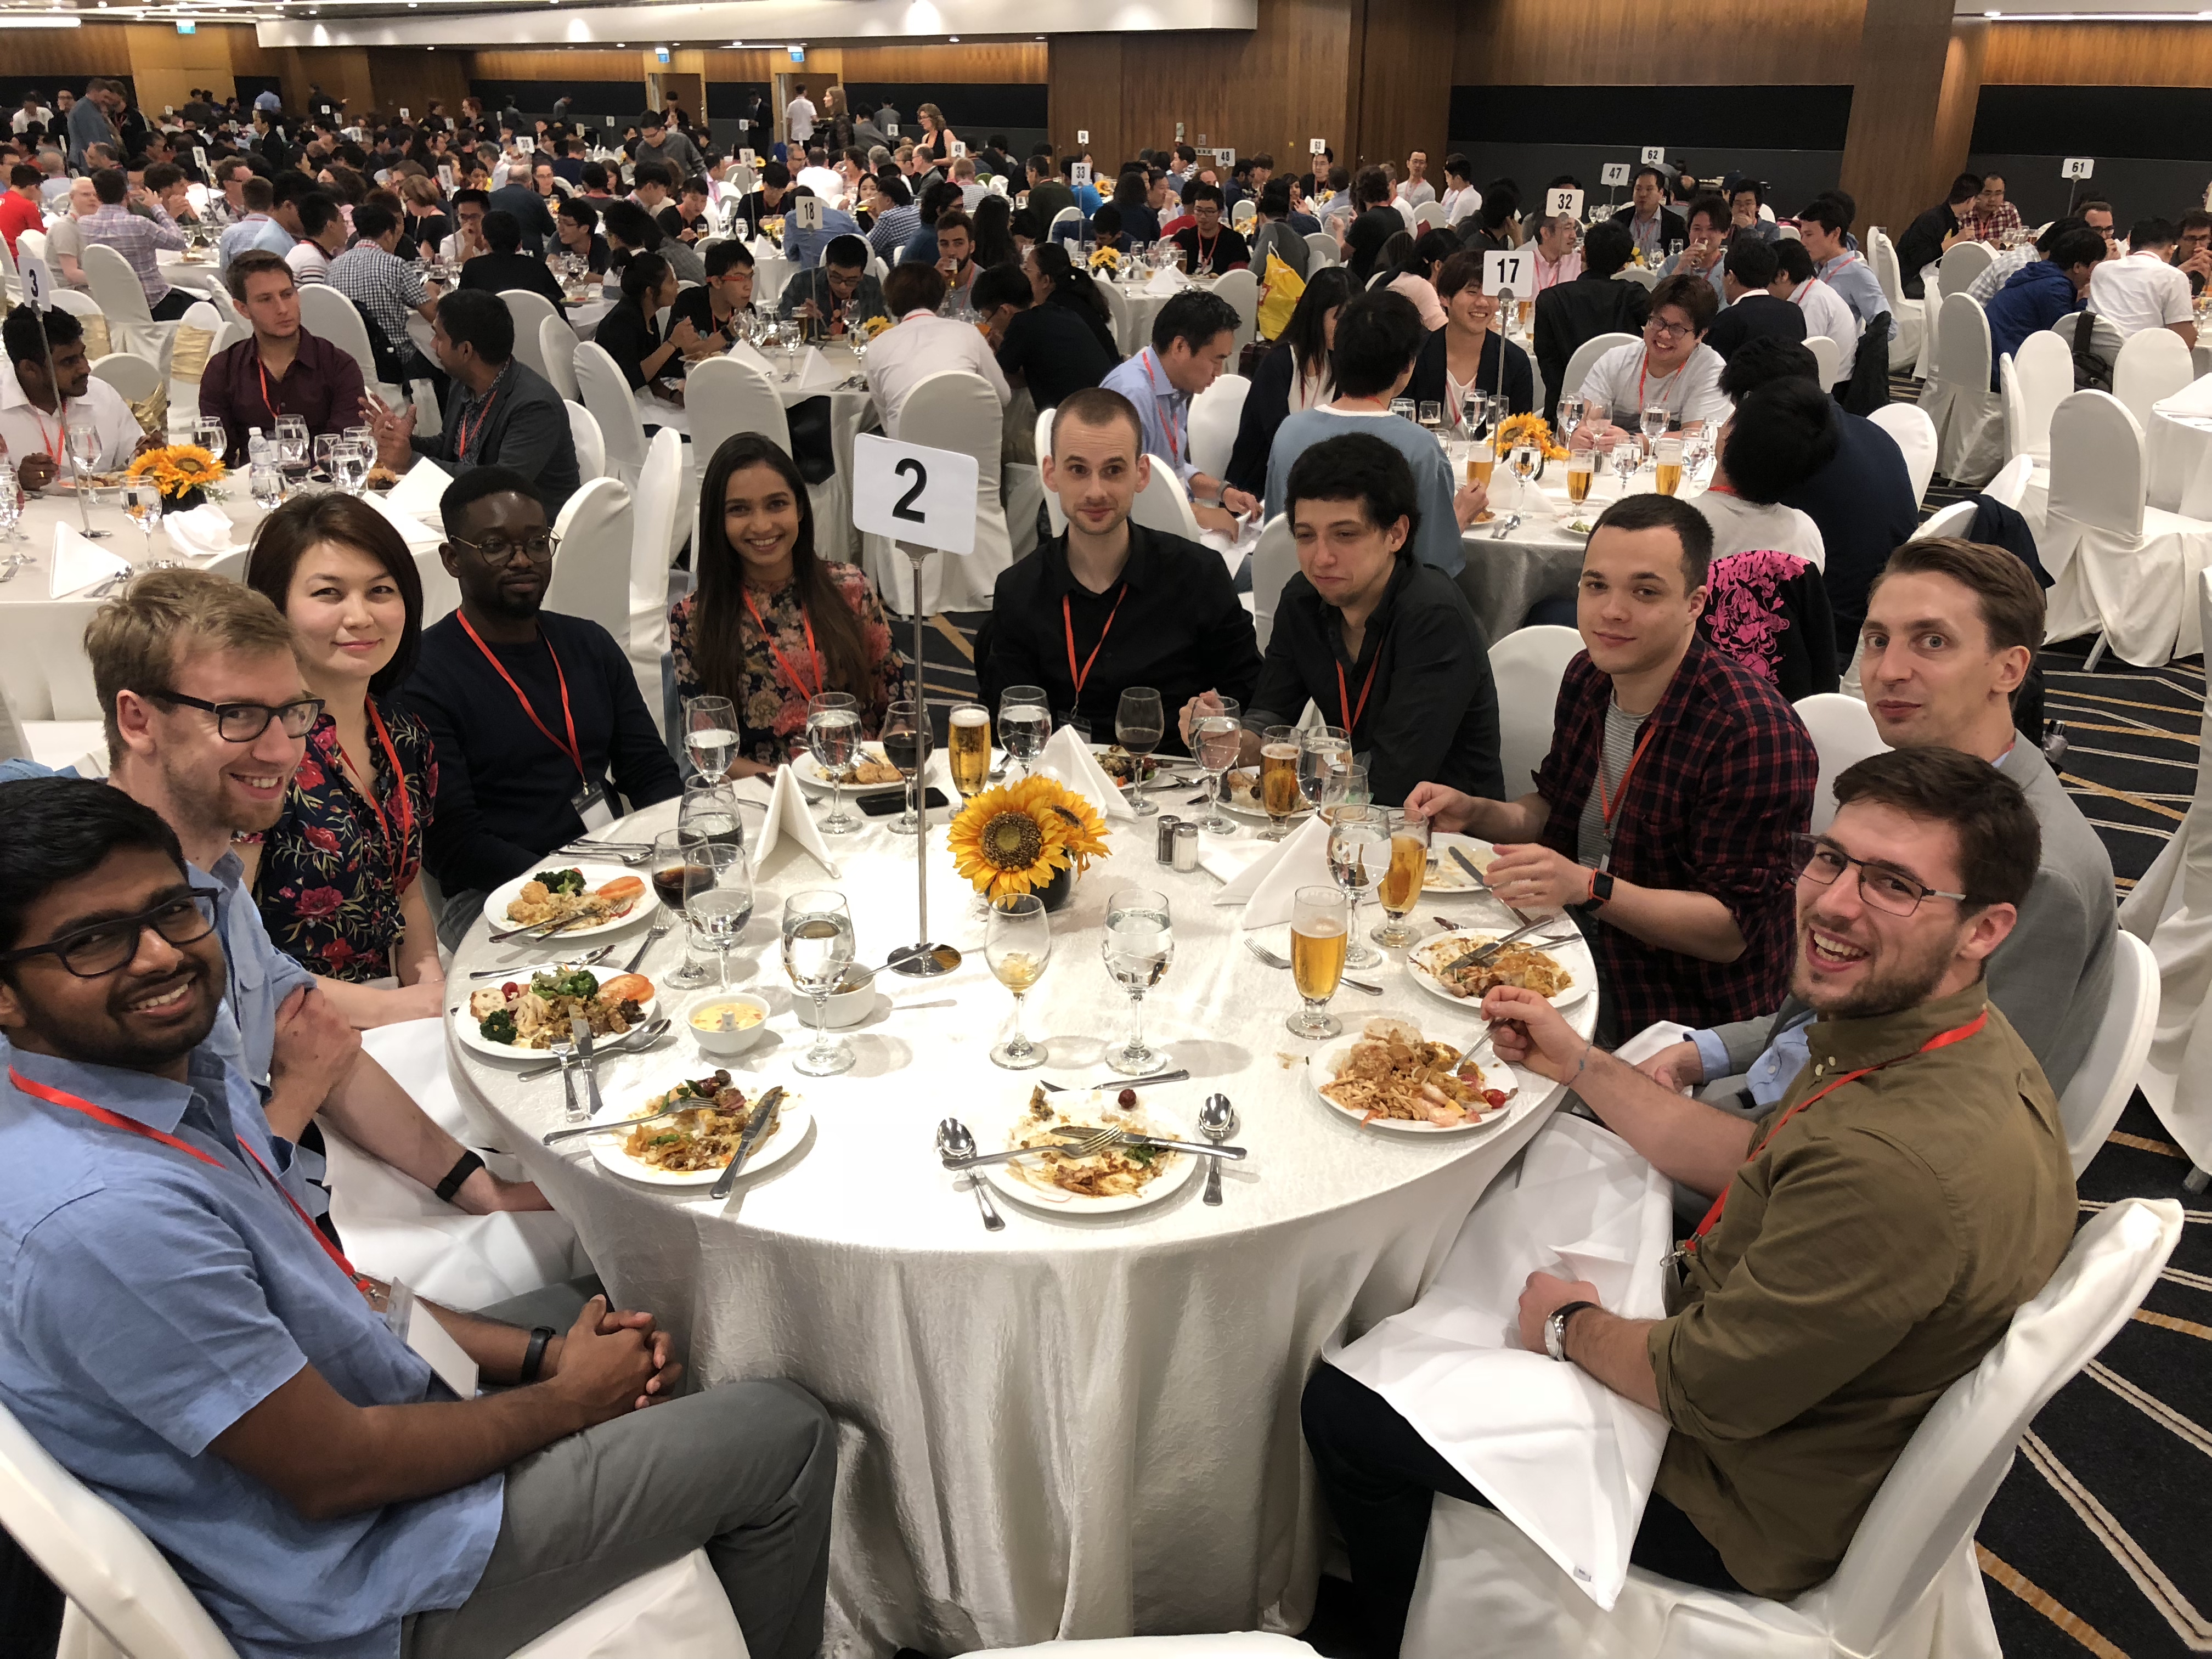 Our awesome team at the UbiComp'18 dinner